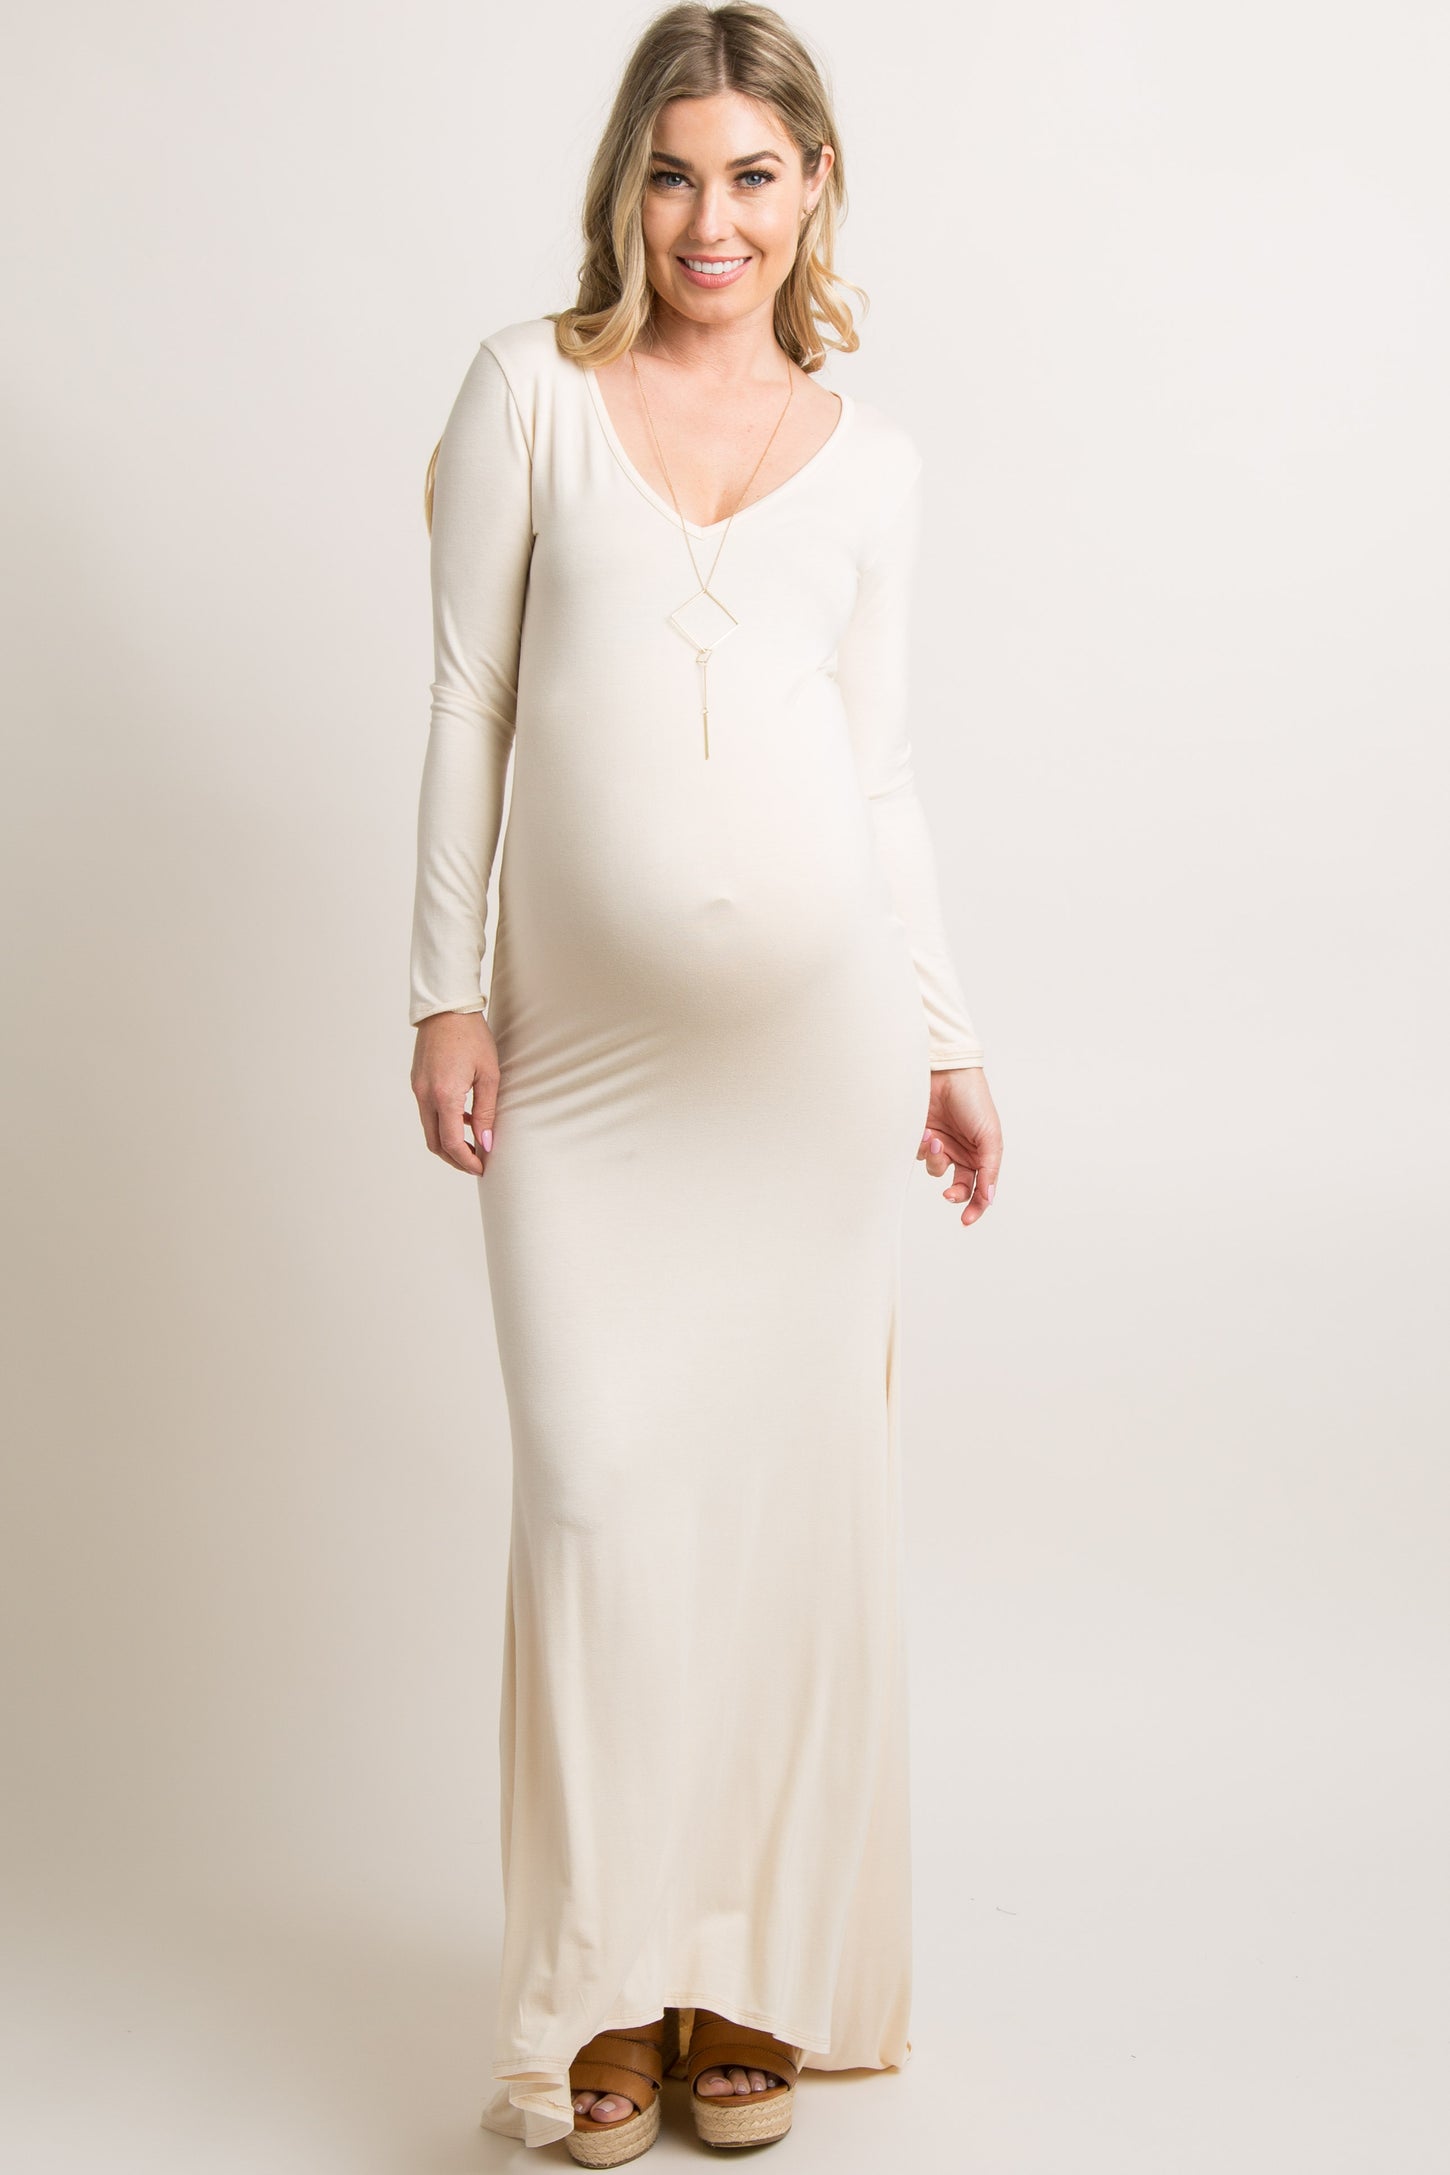 15 Cute Maternity Dresses for Under $30 on